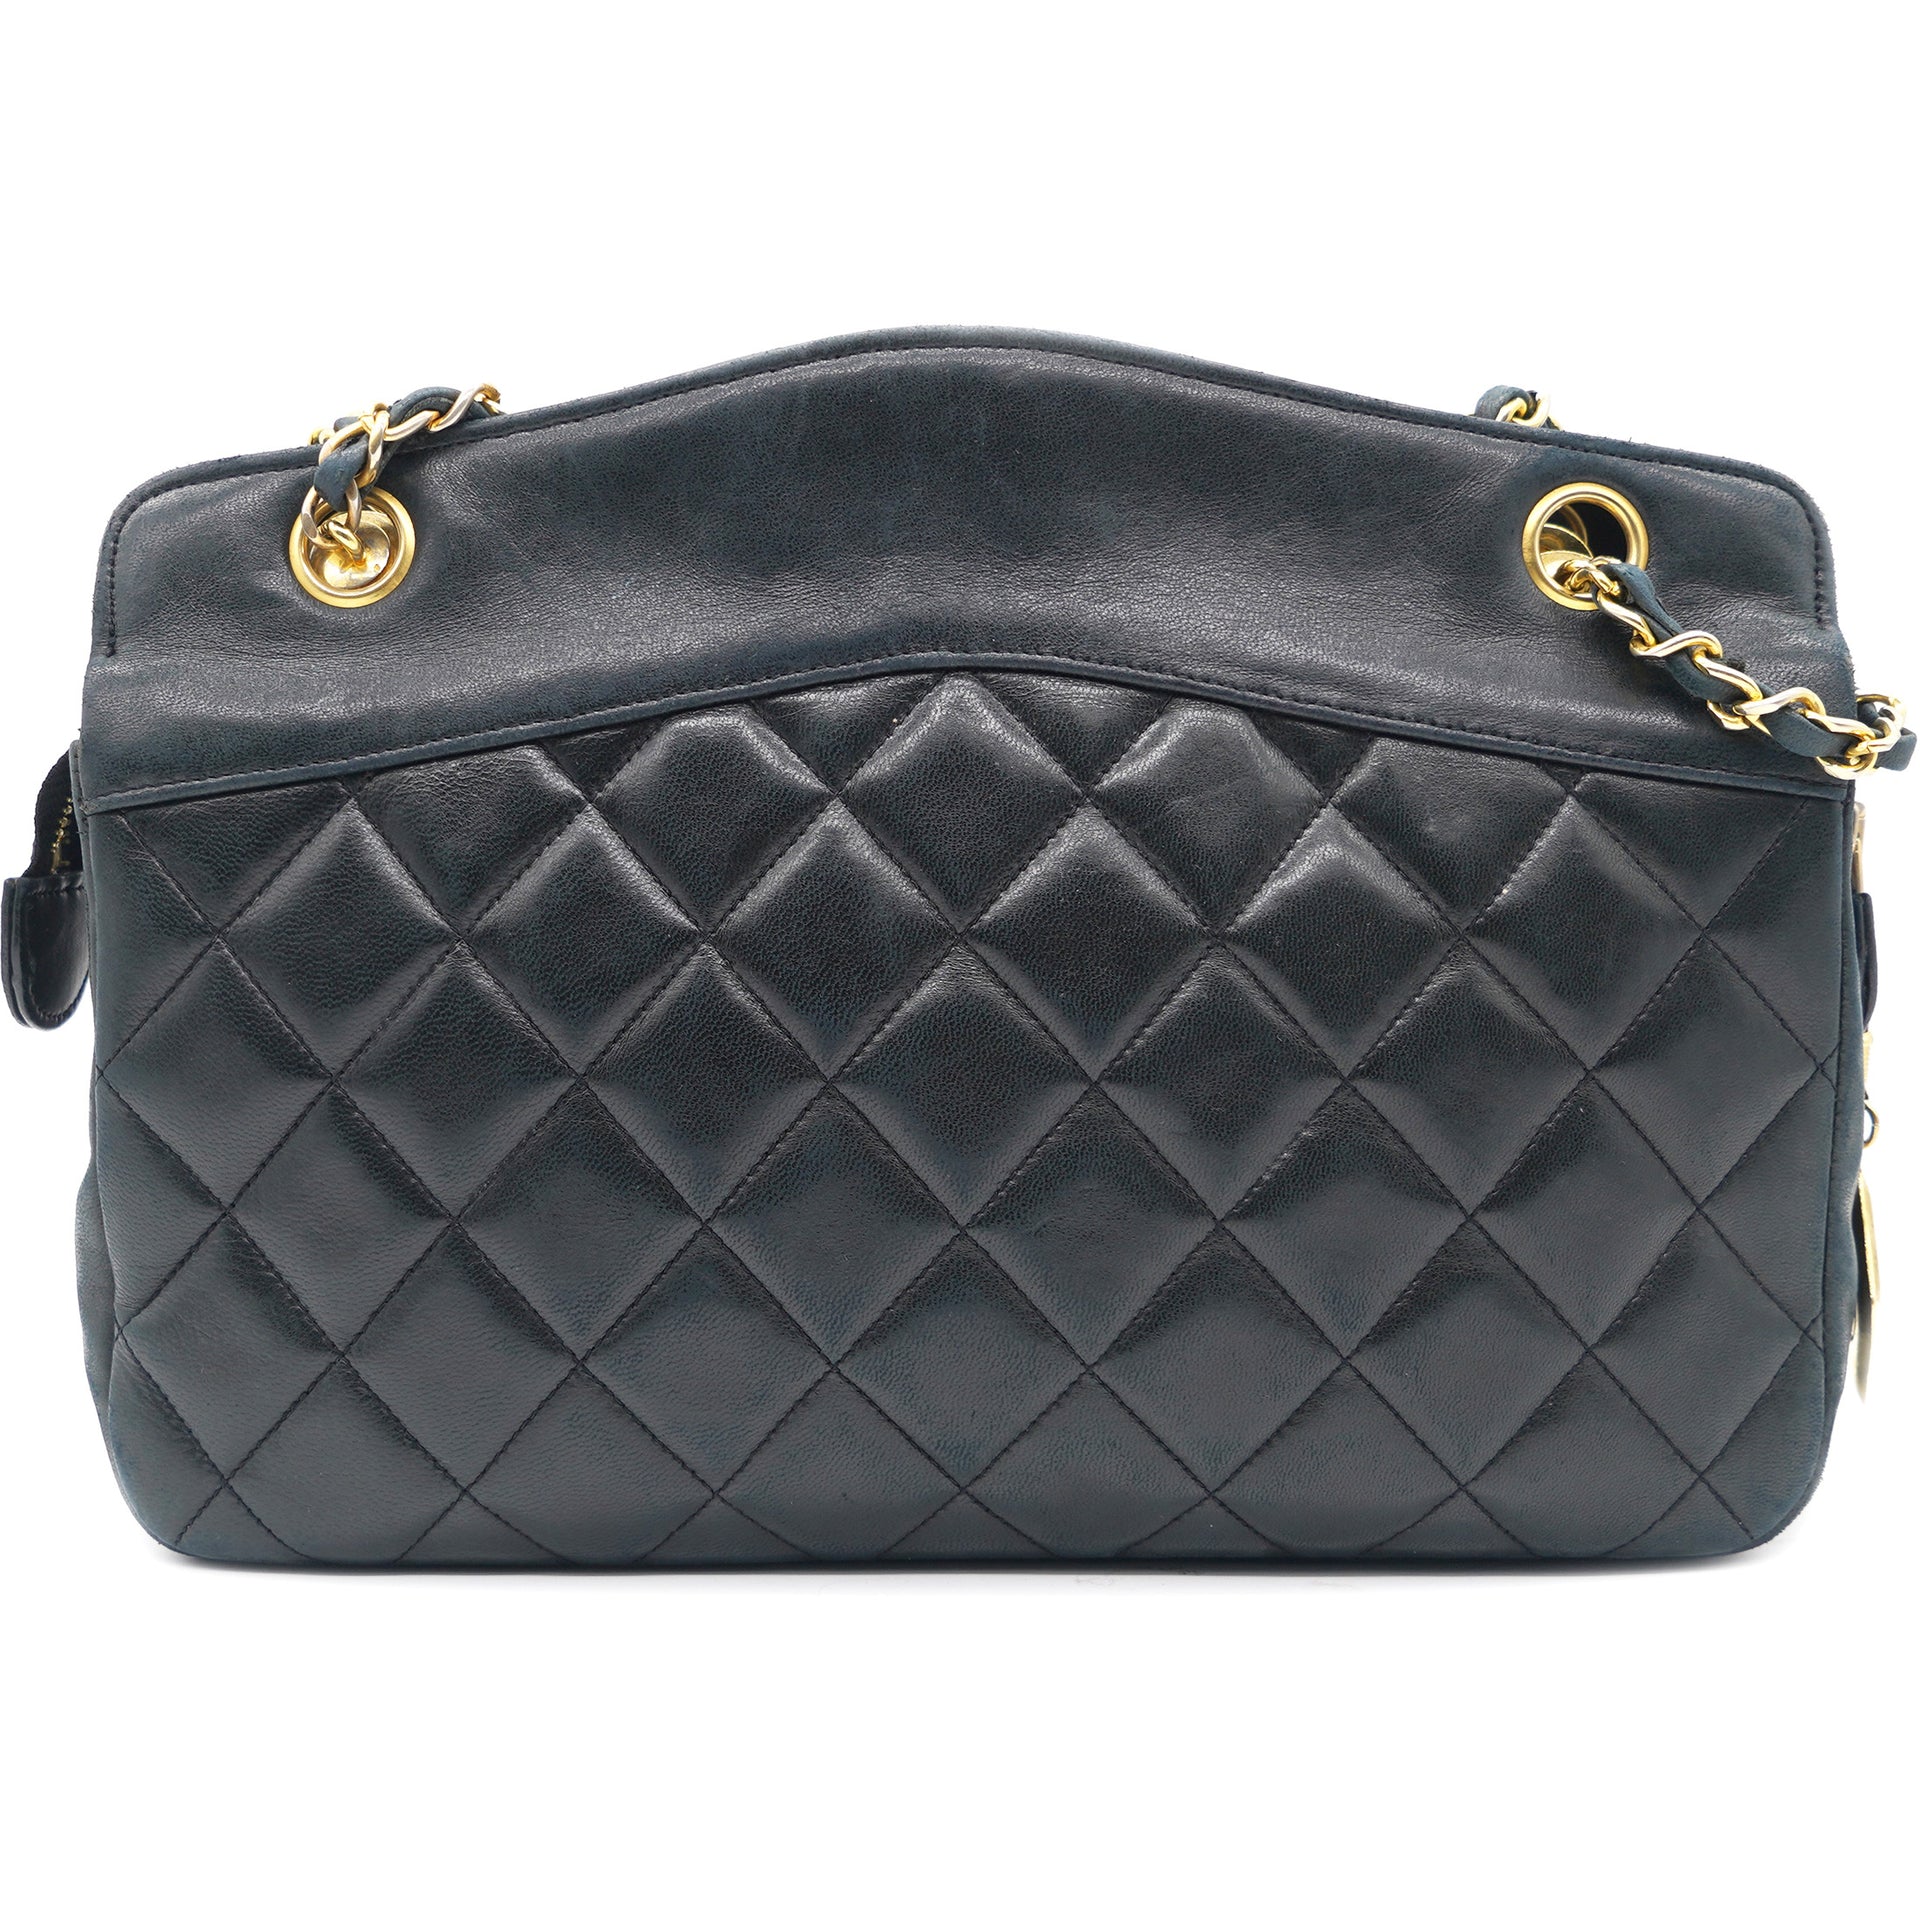 CHANEL TOTE IN BLACK QUILTED LAMBSKIN AND GOLD HARDWARE - WHY I RETURNED IT  